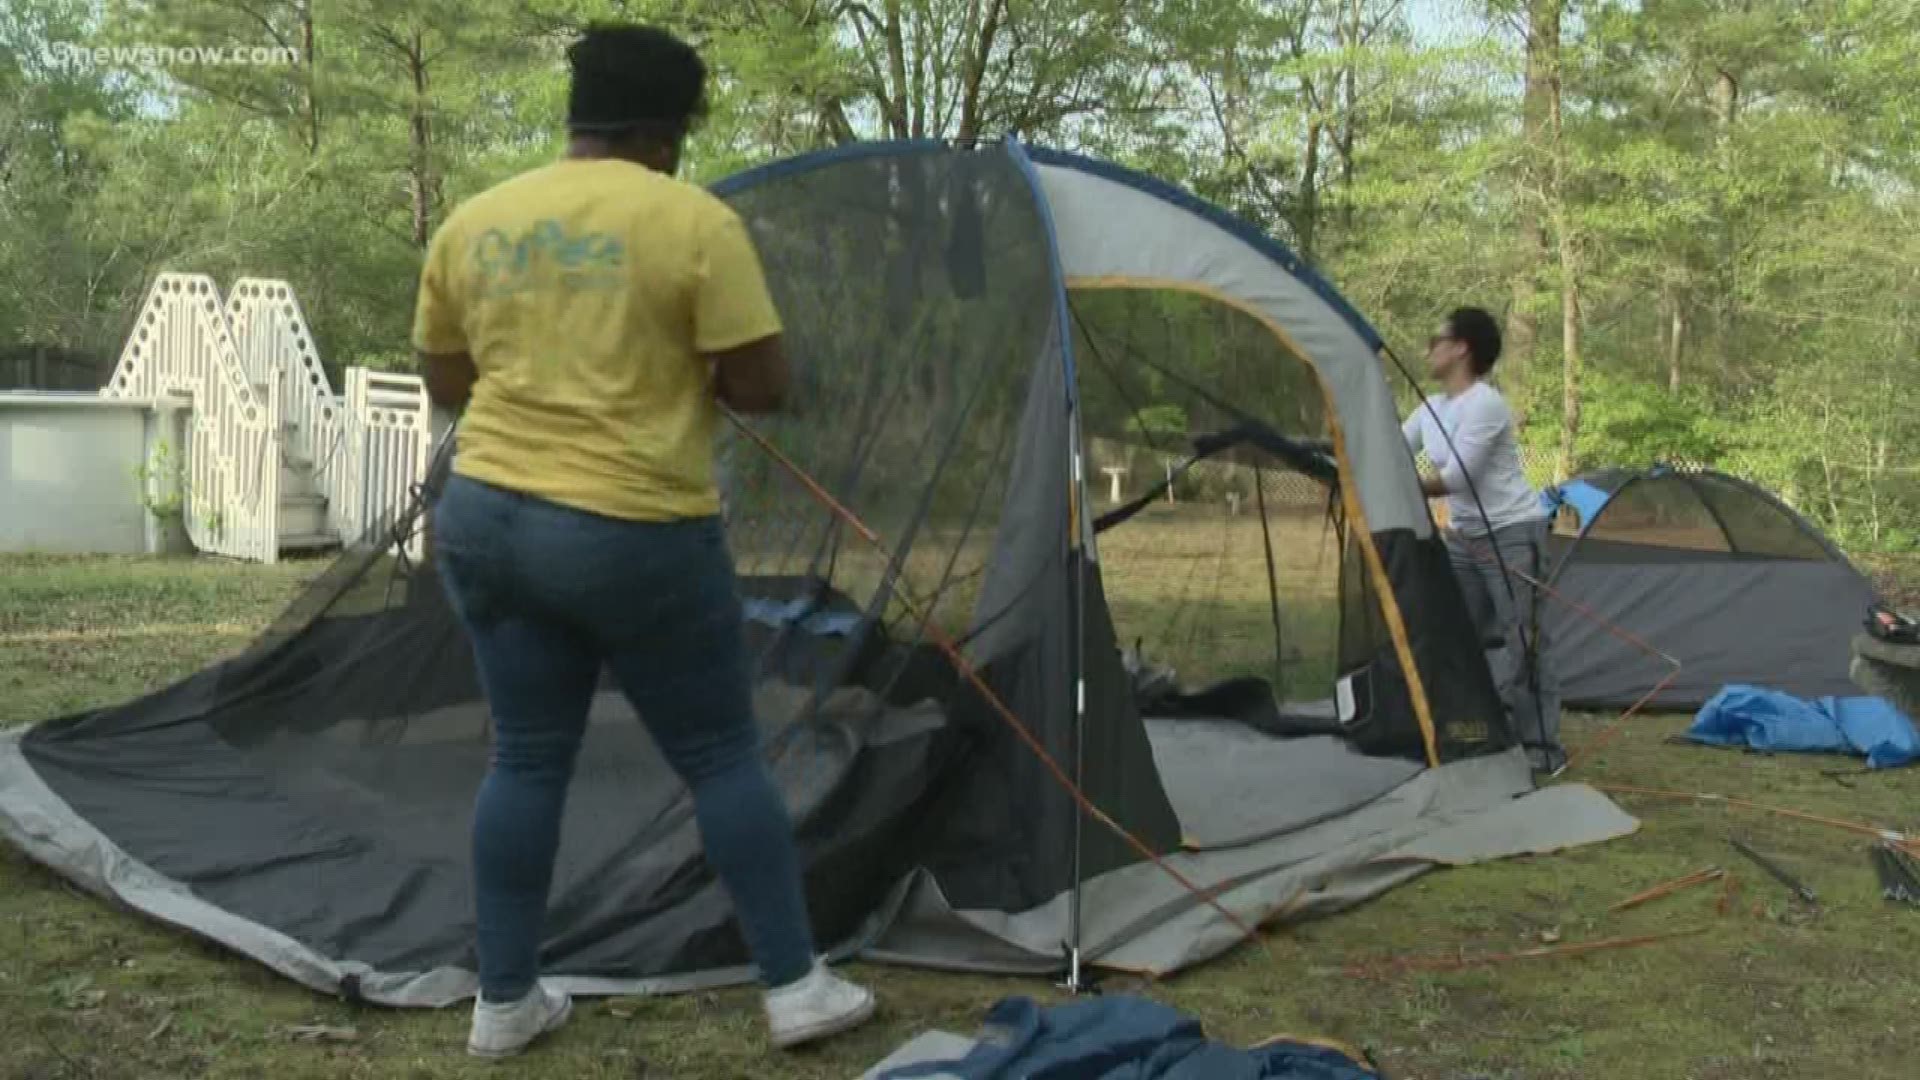 "If you are looking for a really laid back opportunity to have an affordable stay for the festival, somewhere you'll have your transportation taken care of and get some free meals, meet some cool people. We're welcoming anybody," Zyah Dunnah told 13News Now. She said portable bathrooms and showers will also be offered.